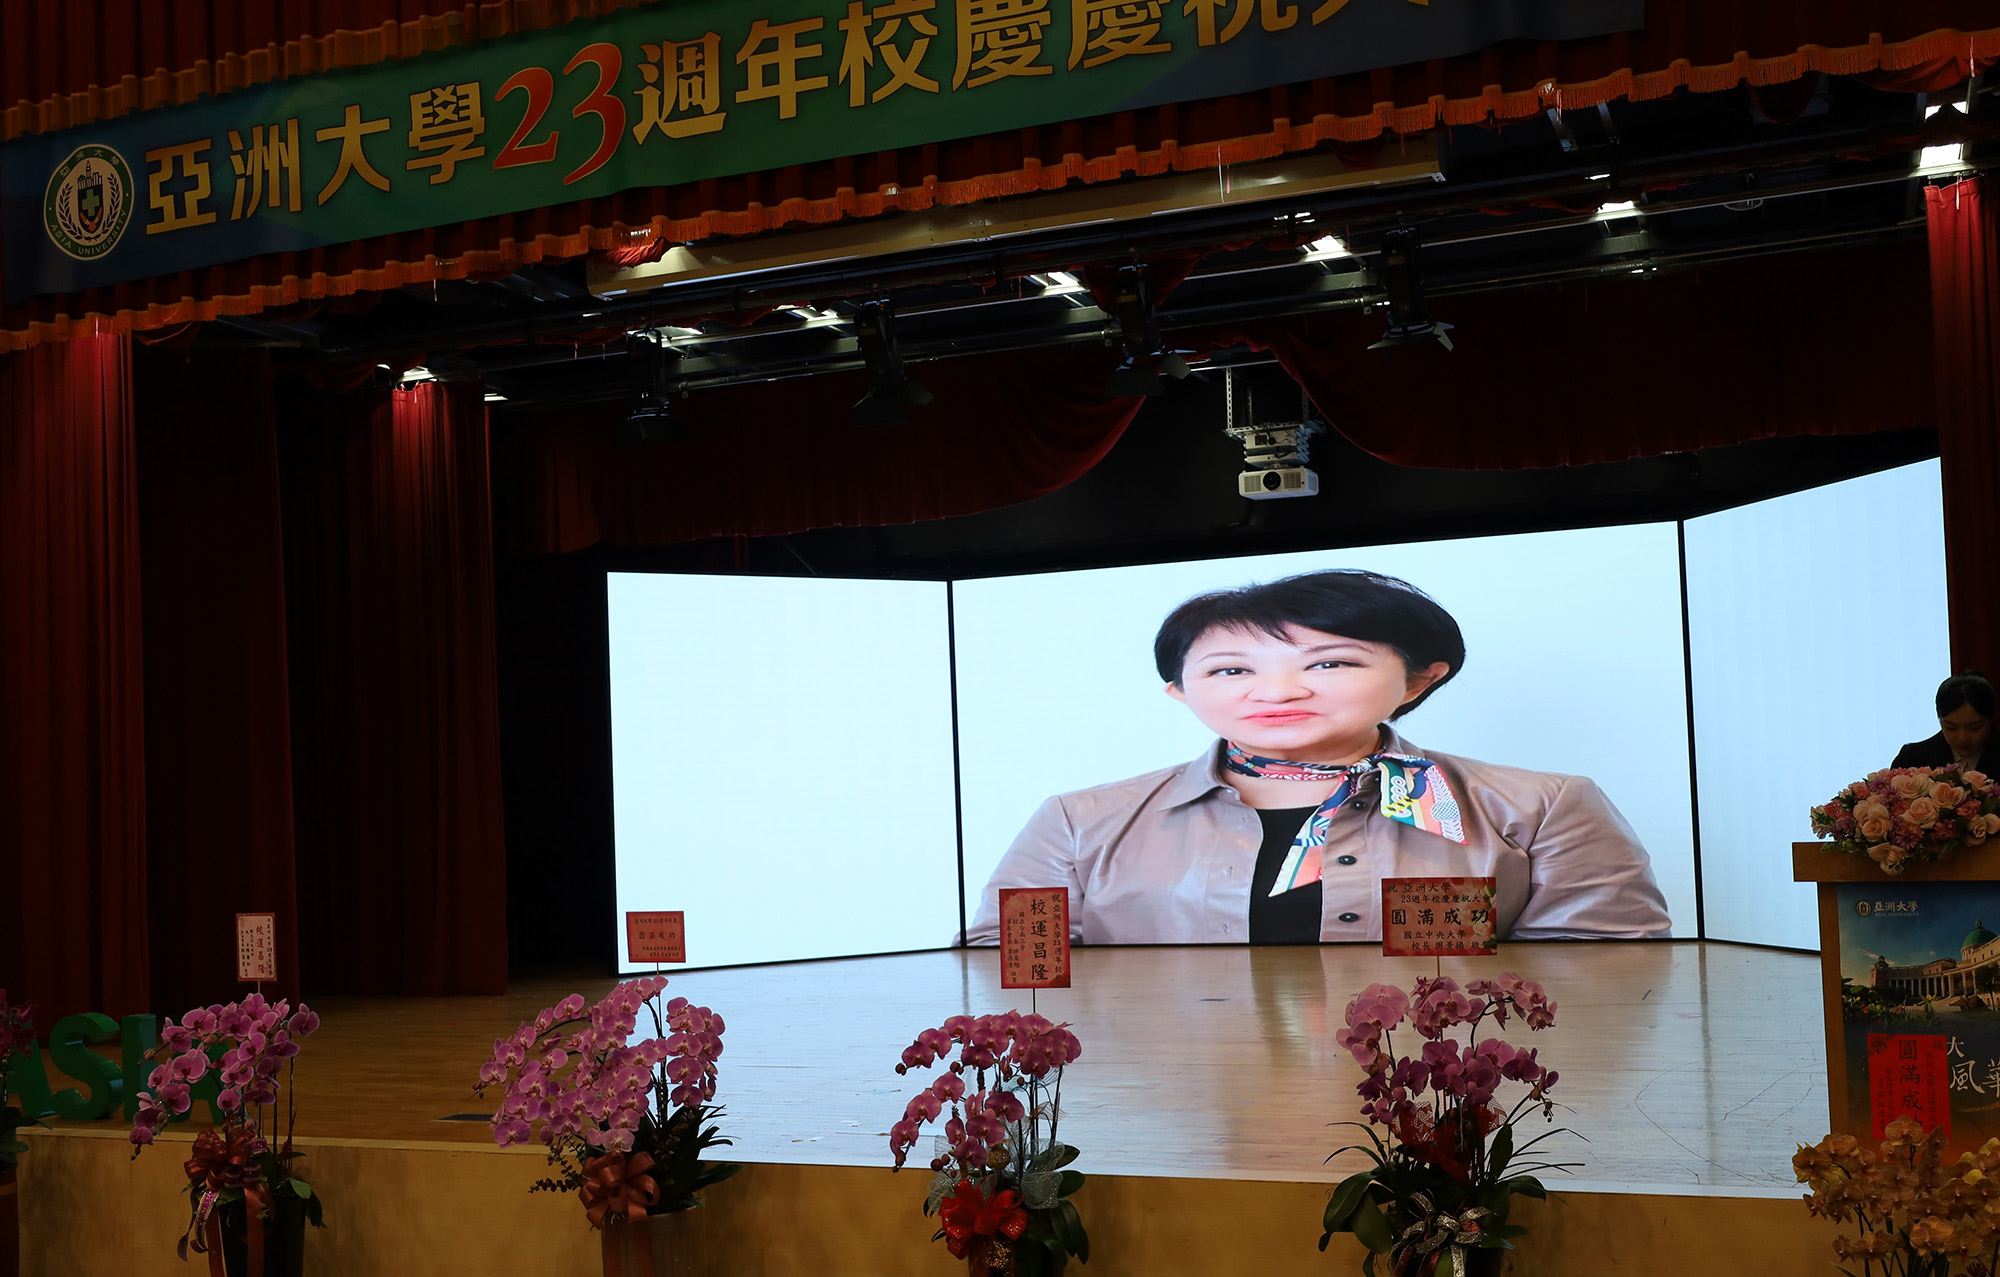 Mayor of Taichung City Shiow-Yen Lu extended her greetings to Asia University through video, wishing them a "Happy Birthday!"